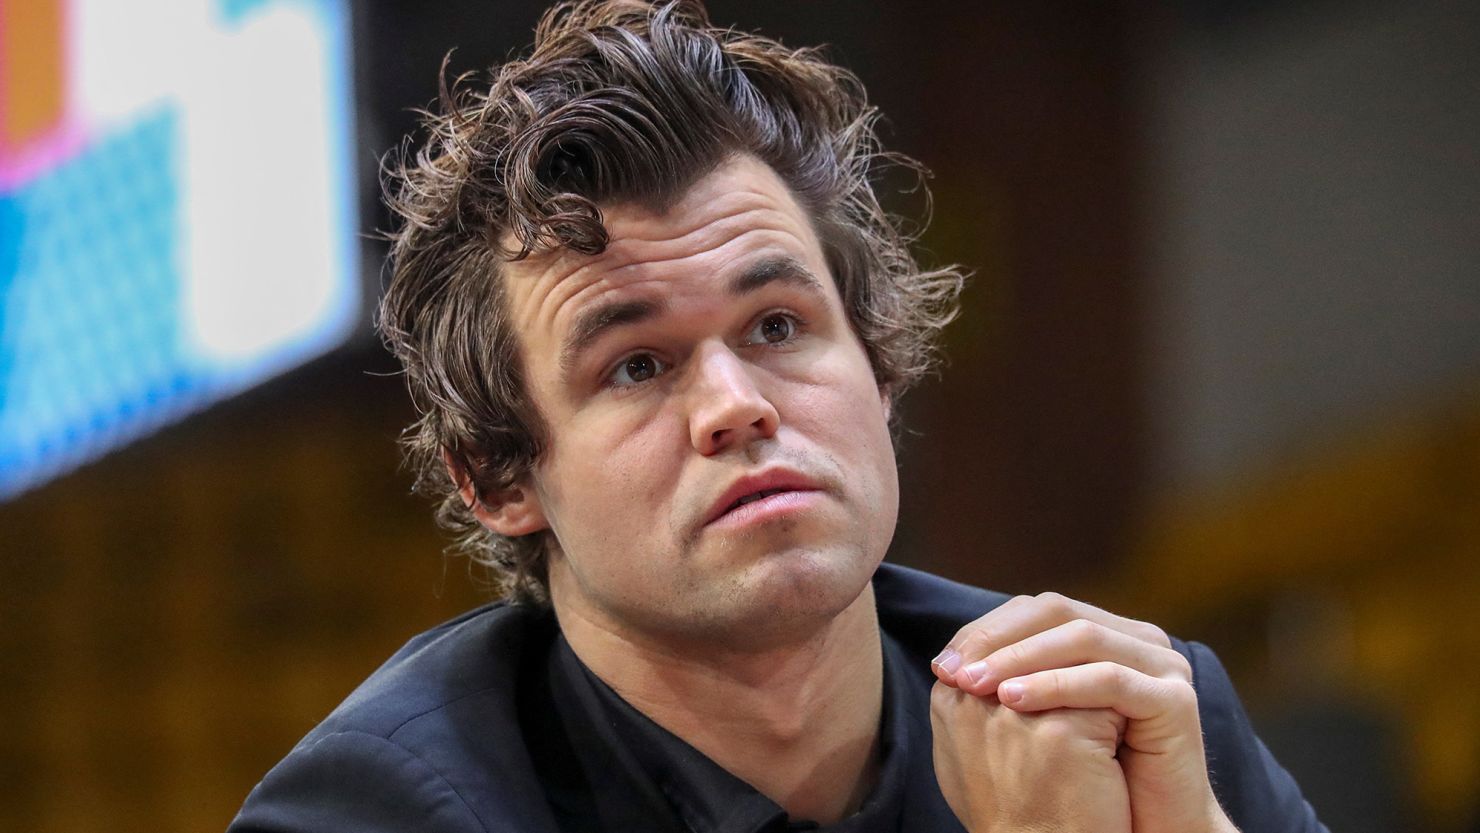 Magnus Carlsen -- seen during the World Rapid and Blitz Championships 2022 in Almaty, Kazakhstan -- will not be defending his world championship.